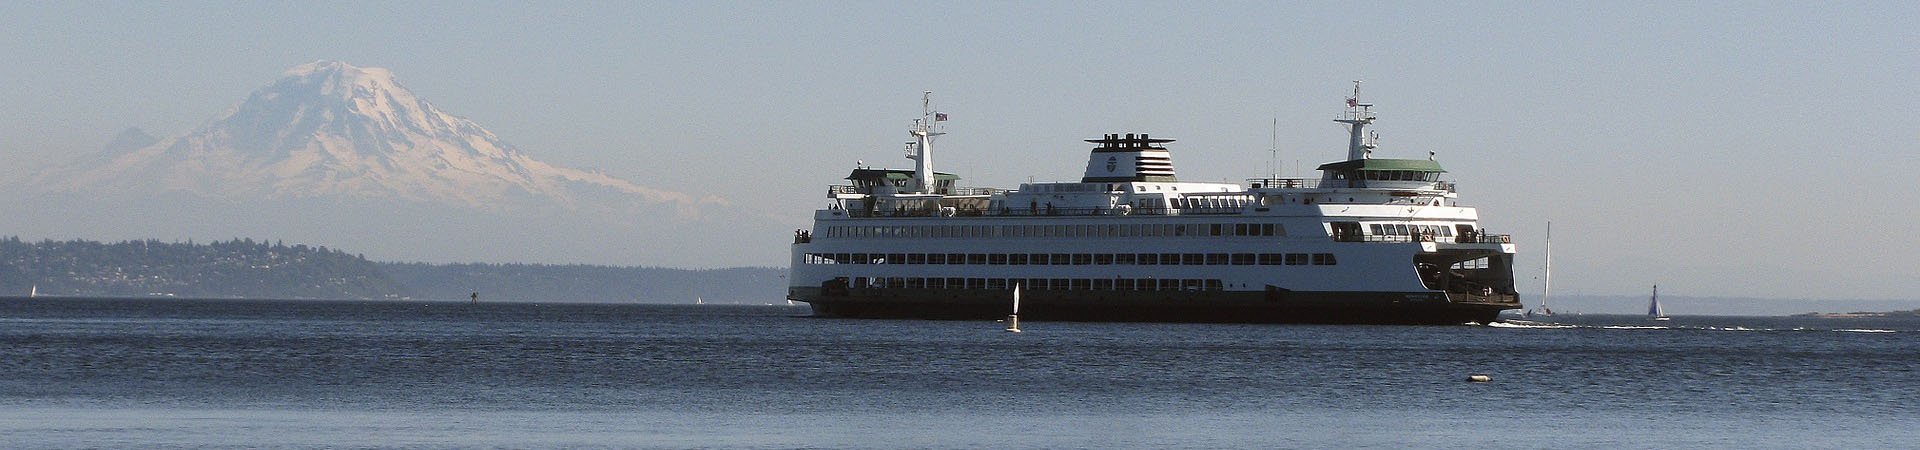 Seattle Ferry and Rainier